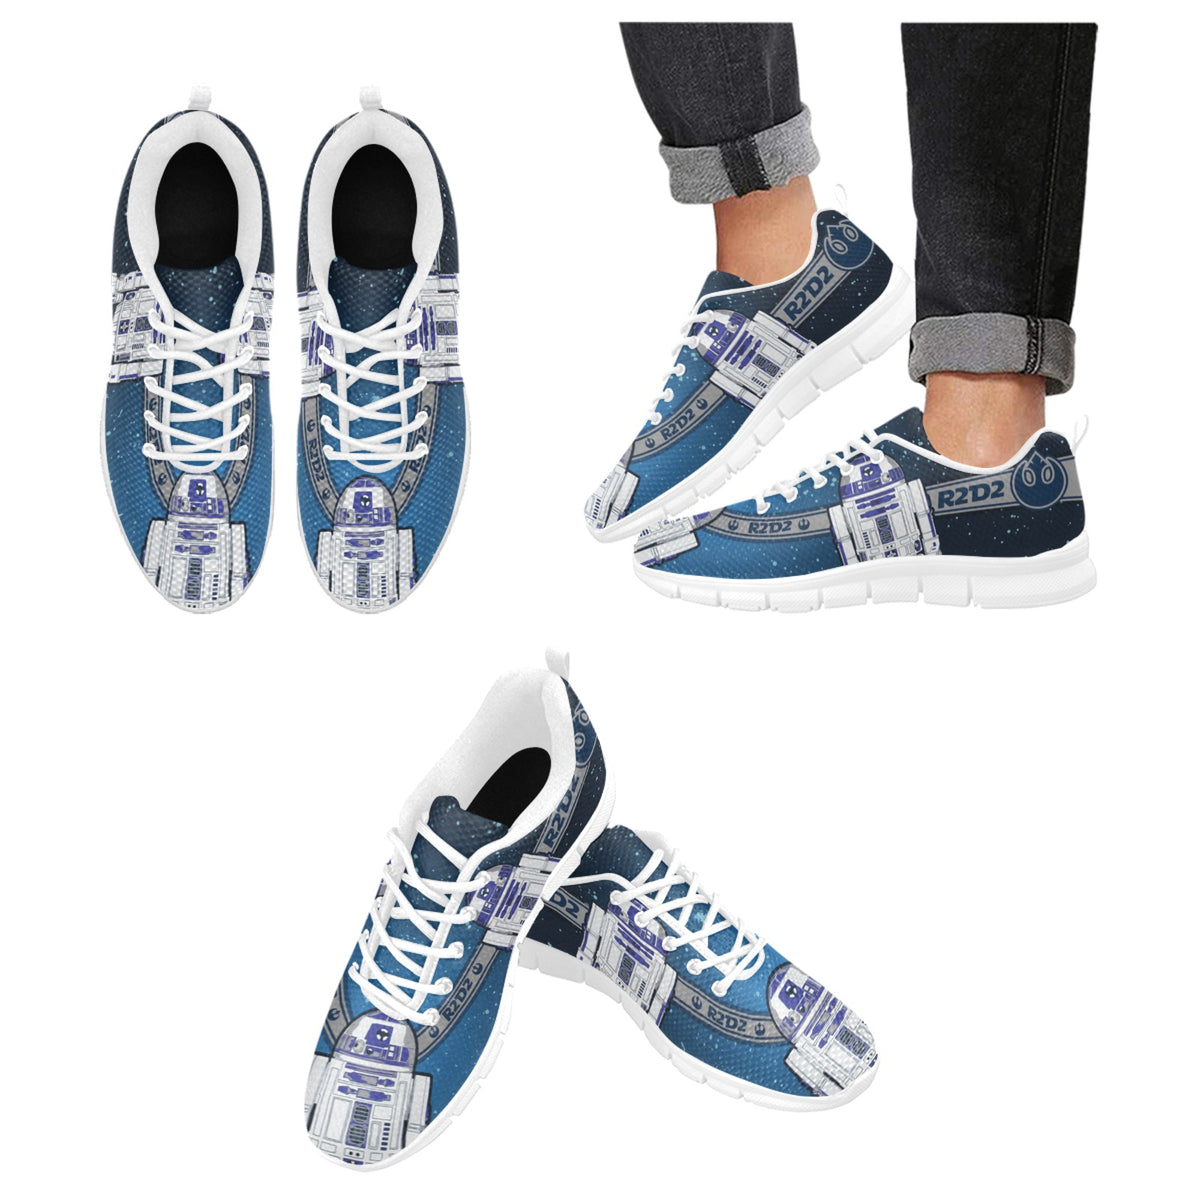 Inspired by R2D2 on Blue Mesh Fabric Running Shoes